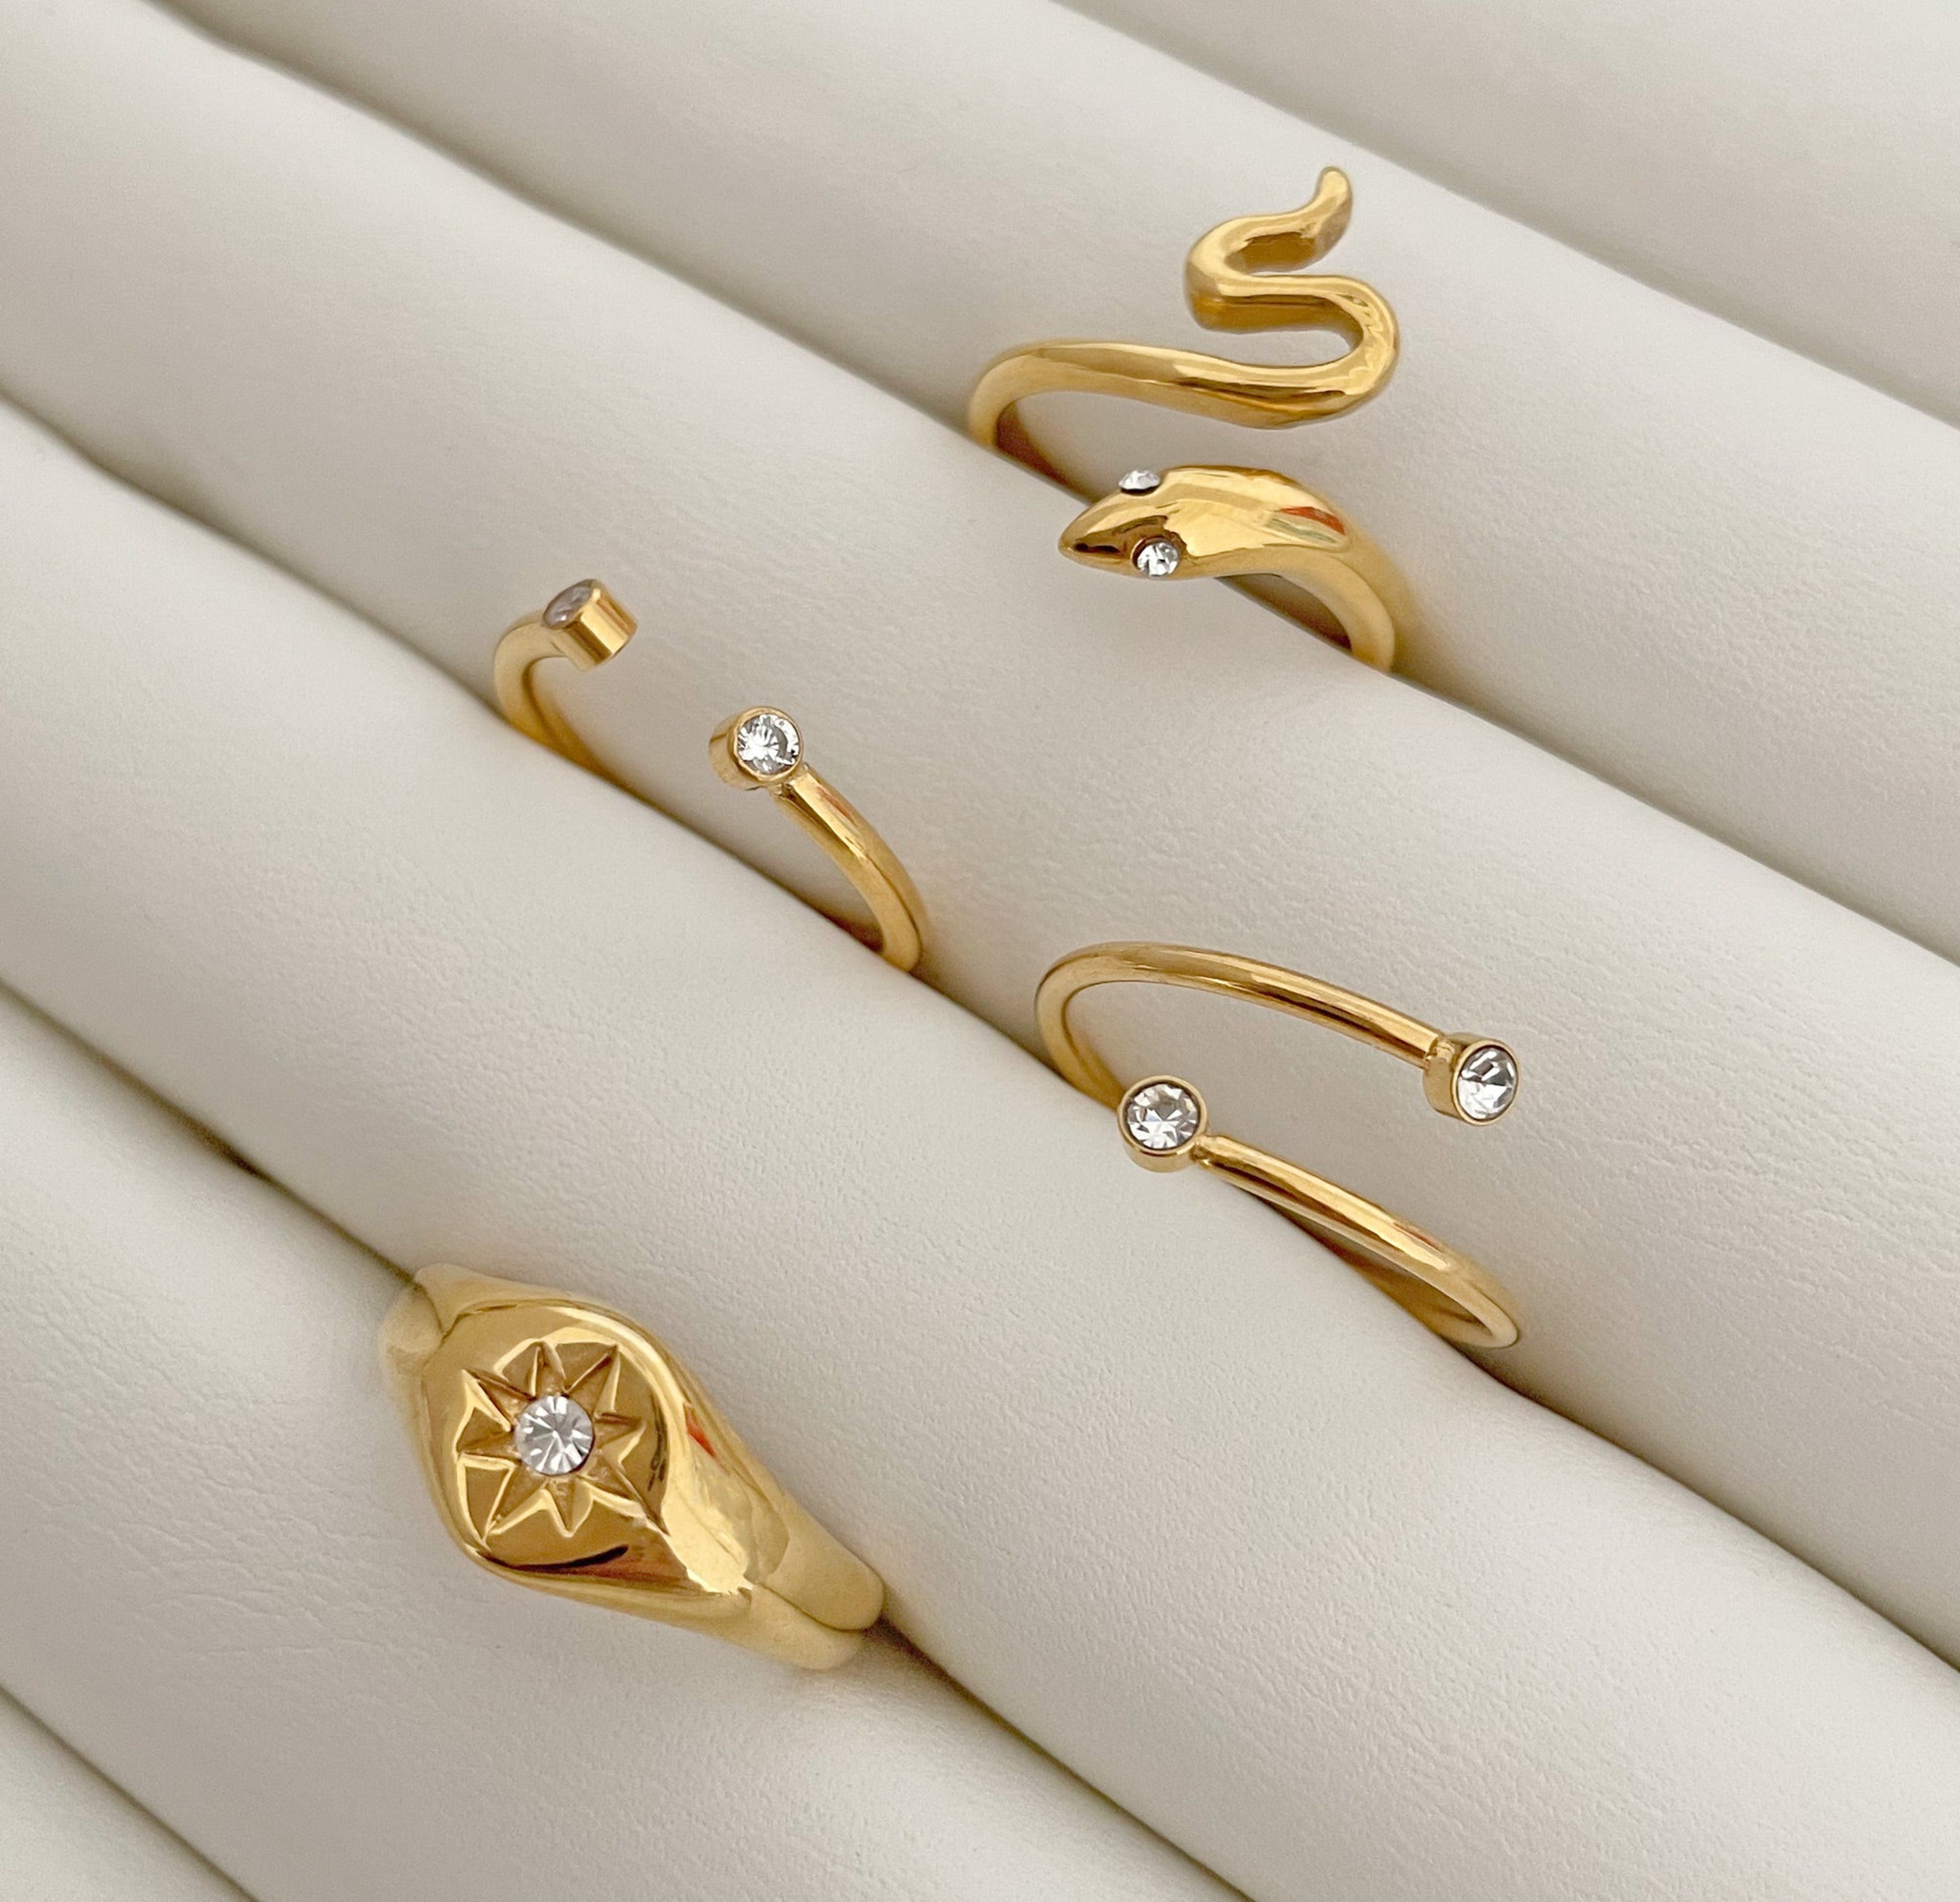 gold spiral open ring waterproof jewelry